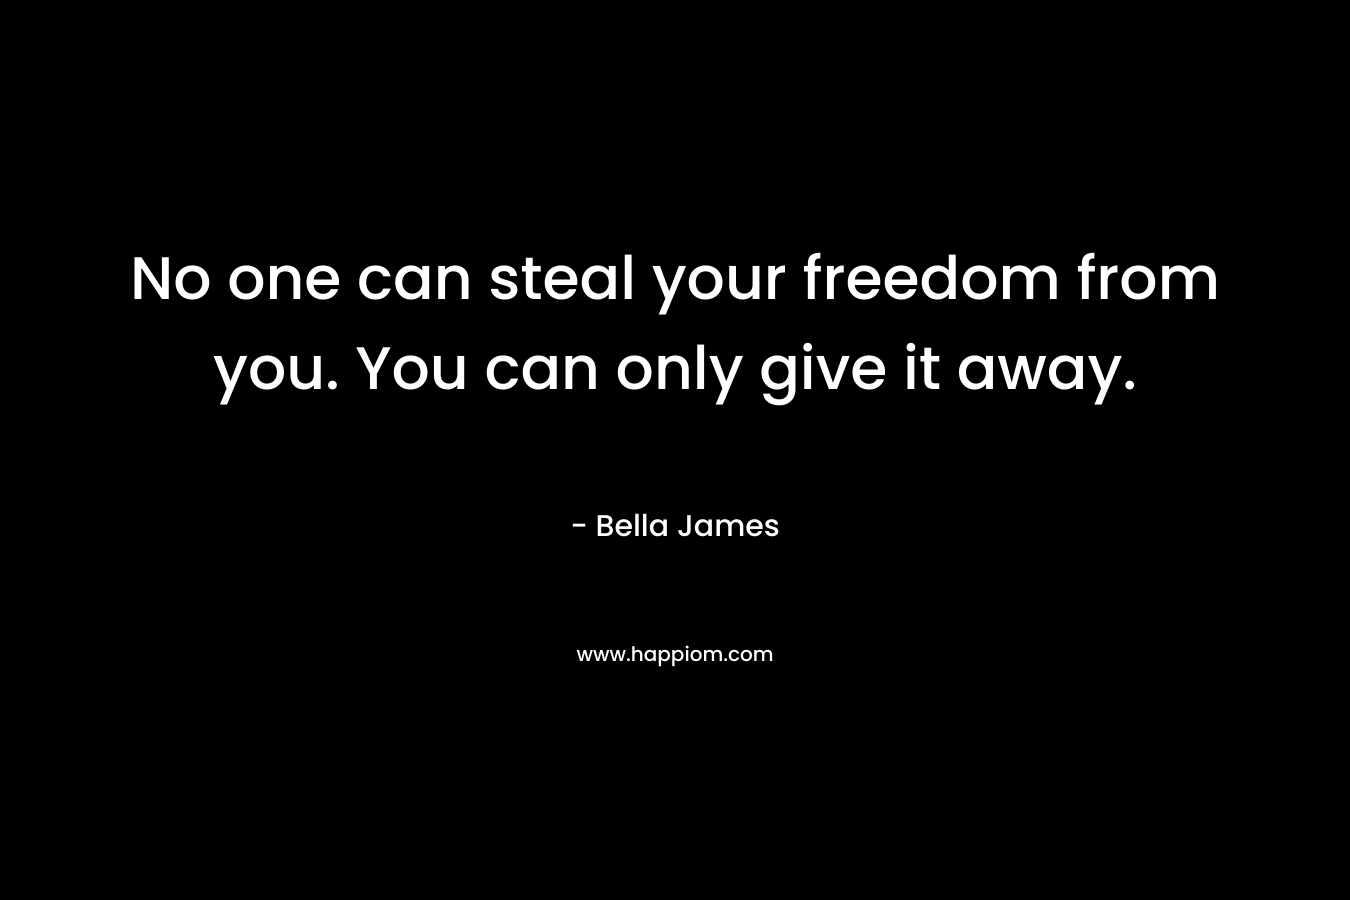 No one can steal your freedom from you. You can only give it away. – Bella James